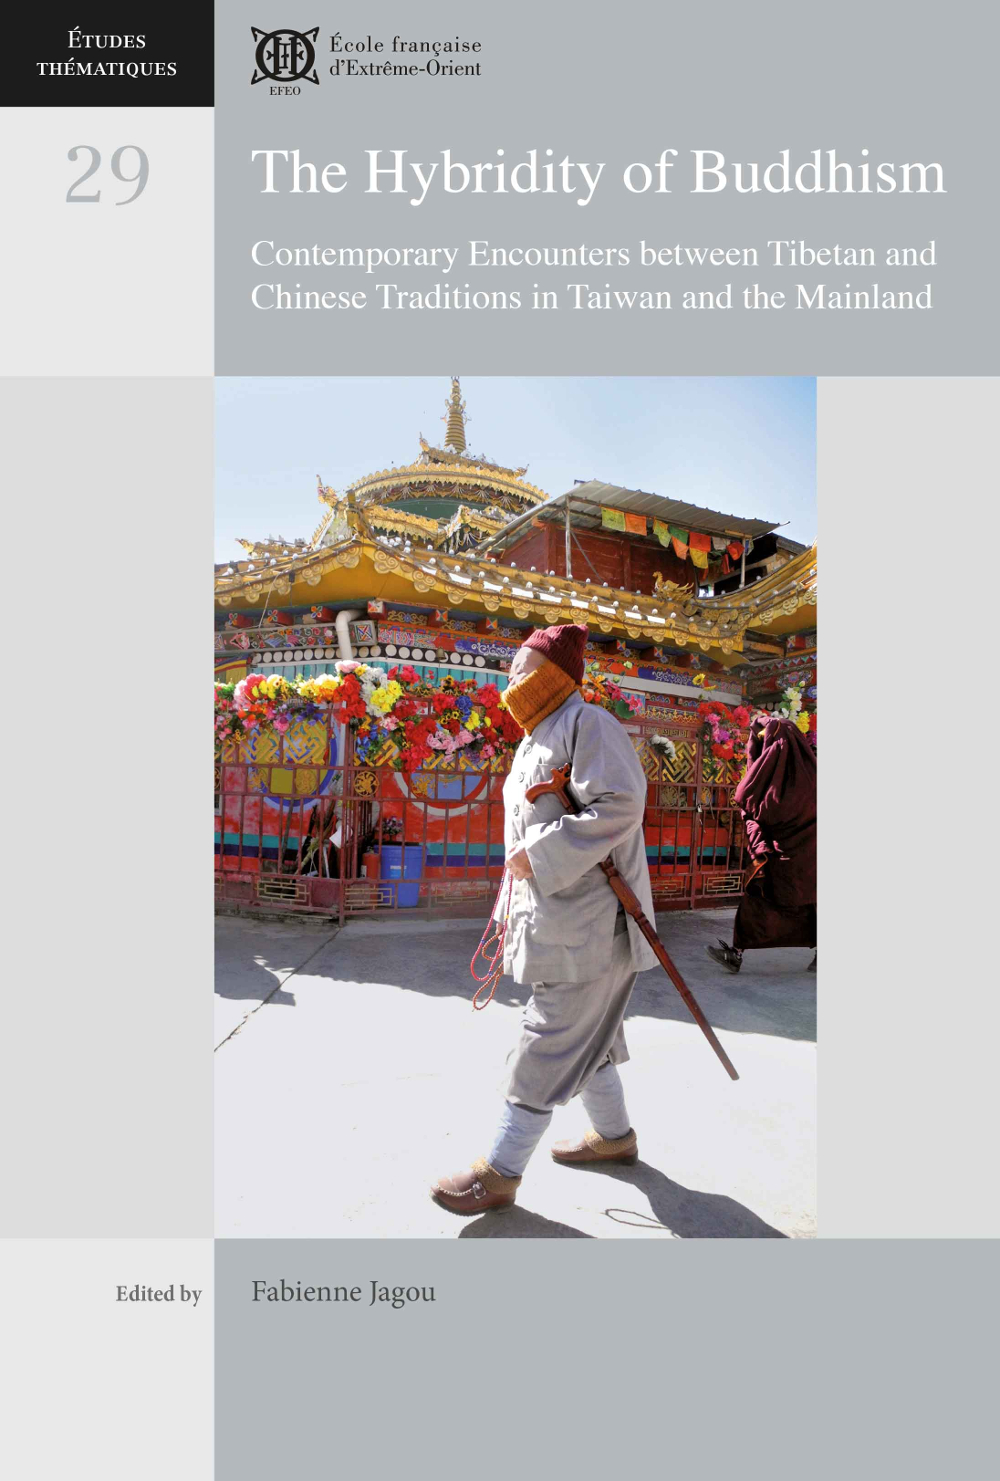 The Hybridity of Buddhism : Contemporary Encounters between Tibetan and Chinese Traditions in Taiwan and the Mainland